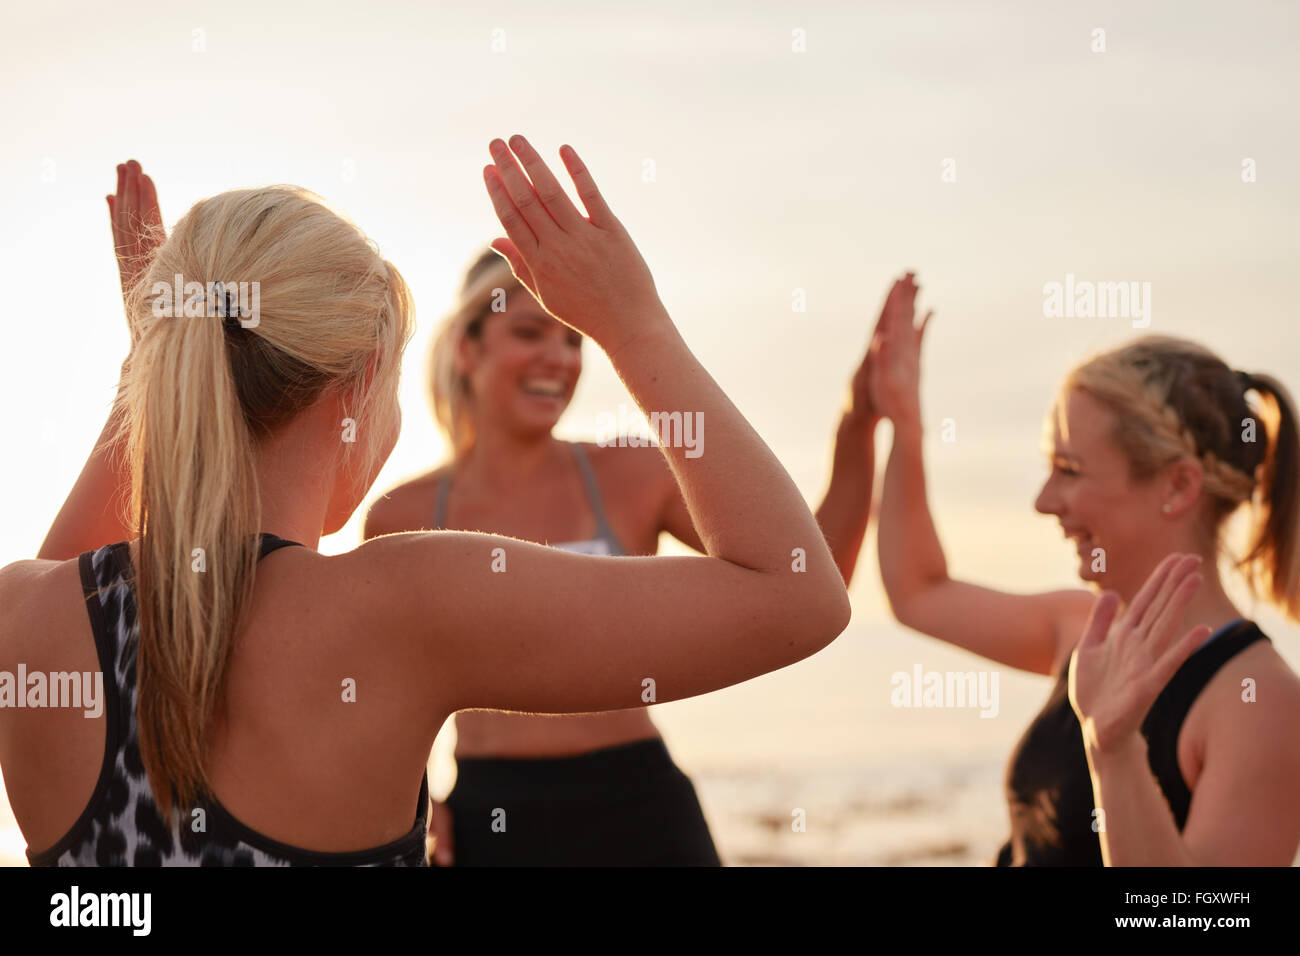 Runners giving high five to each other after a good training session. Group of athletes celebrating success. Stock Photo